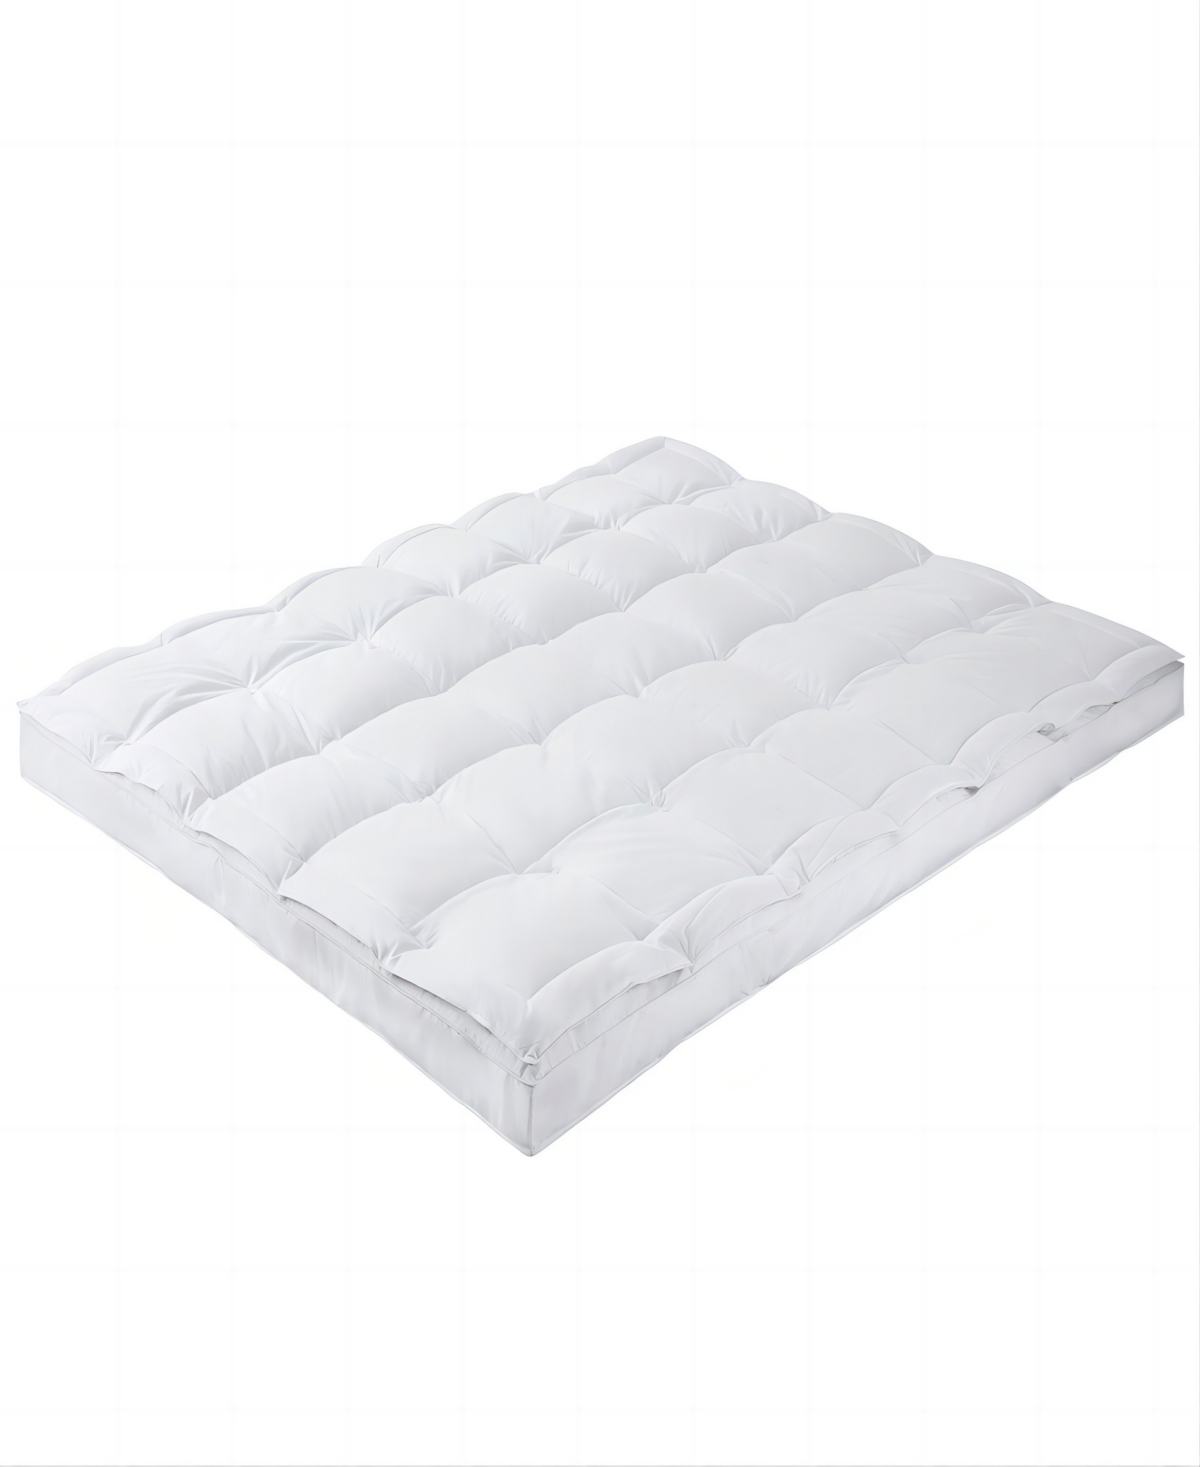 Unikome 3" Goose Feather Bed Mattress Topper With 300 Thread Count Cotton Fabric, King In White